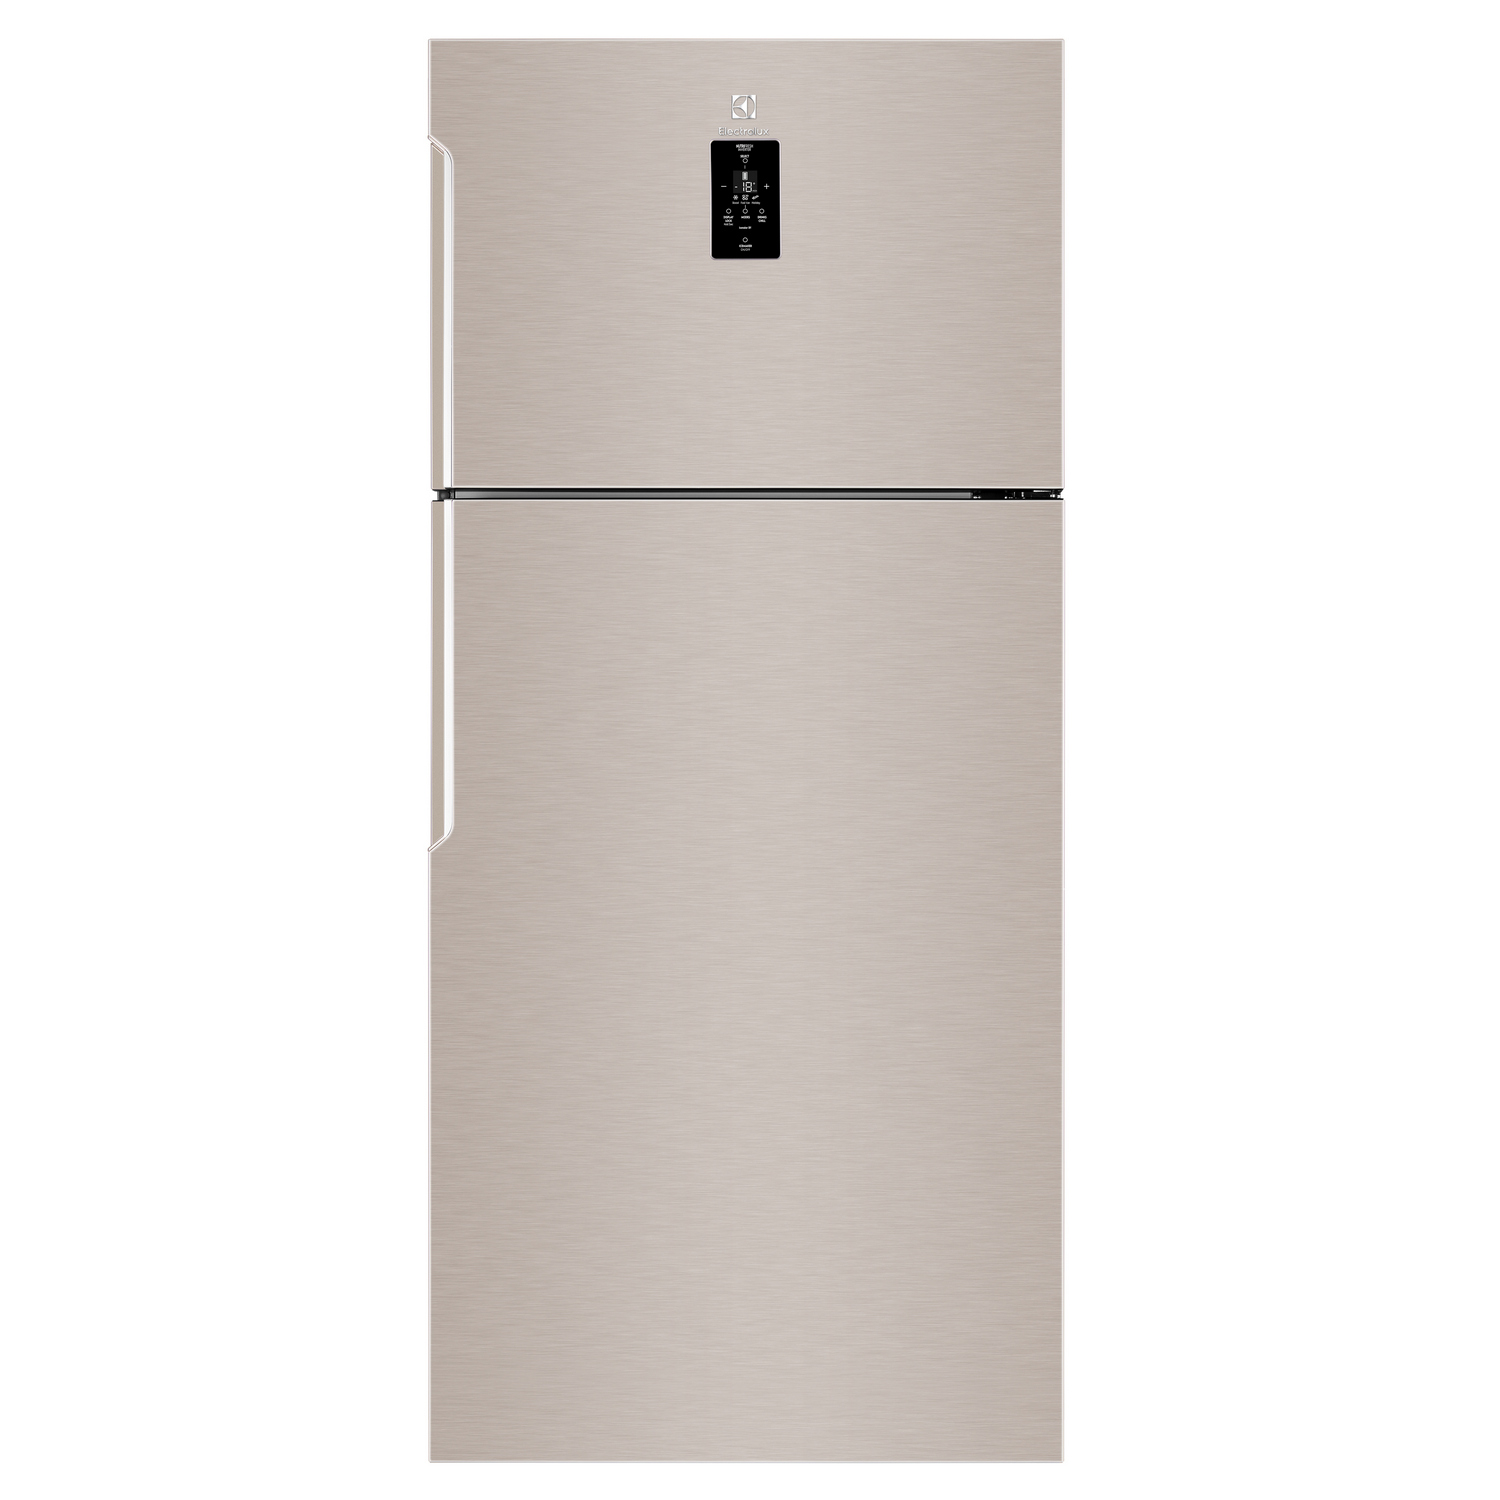 Electrolux Double Doors Refrigerator (18.9 Cubic) ETE5720B-G RTH